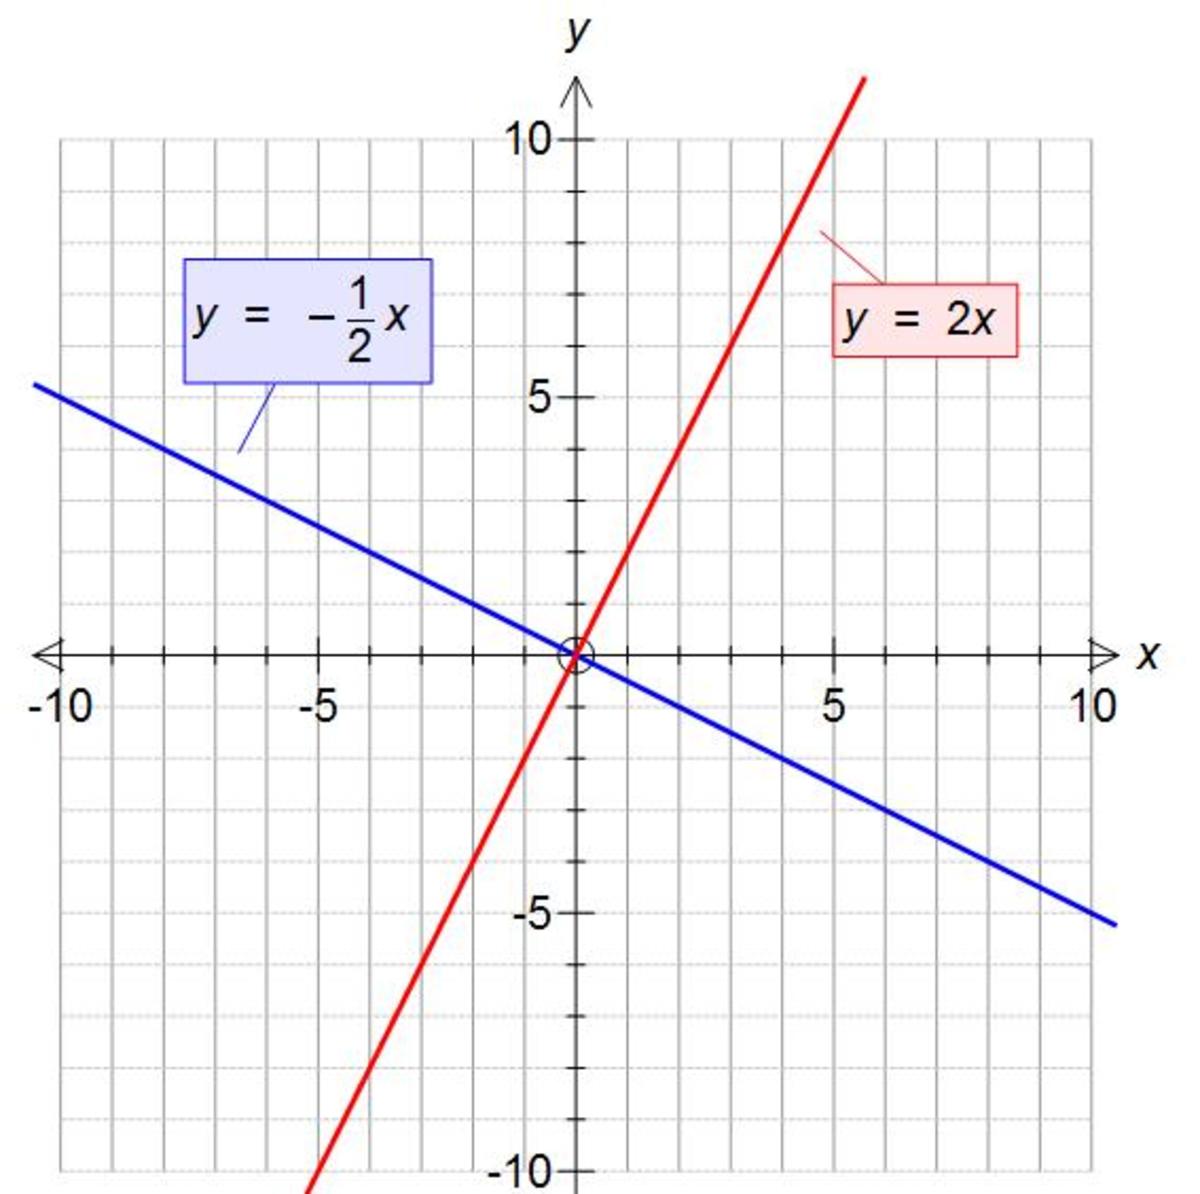 perpendicular-gradients-calculating-the-perpendicular-gradient-of-a-linear-graph